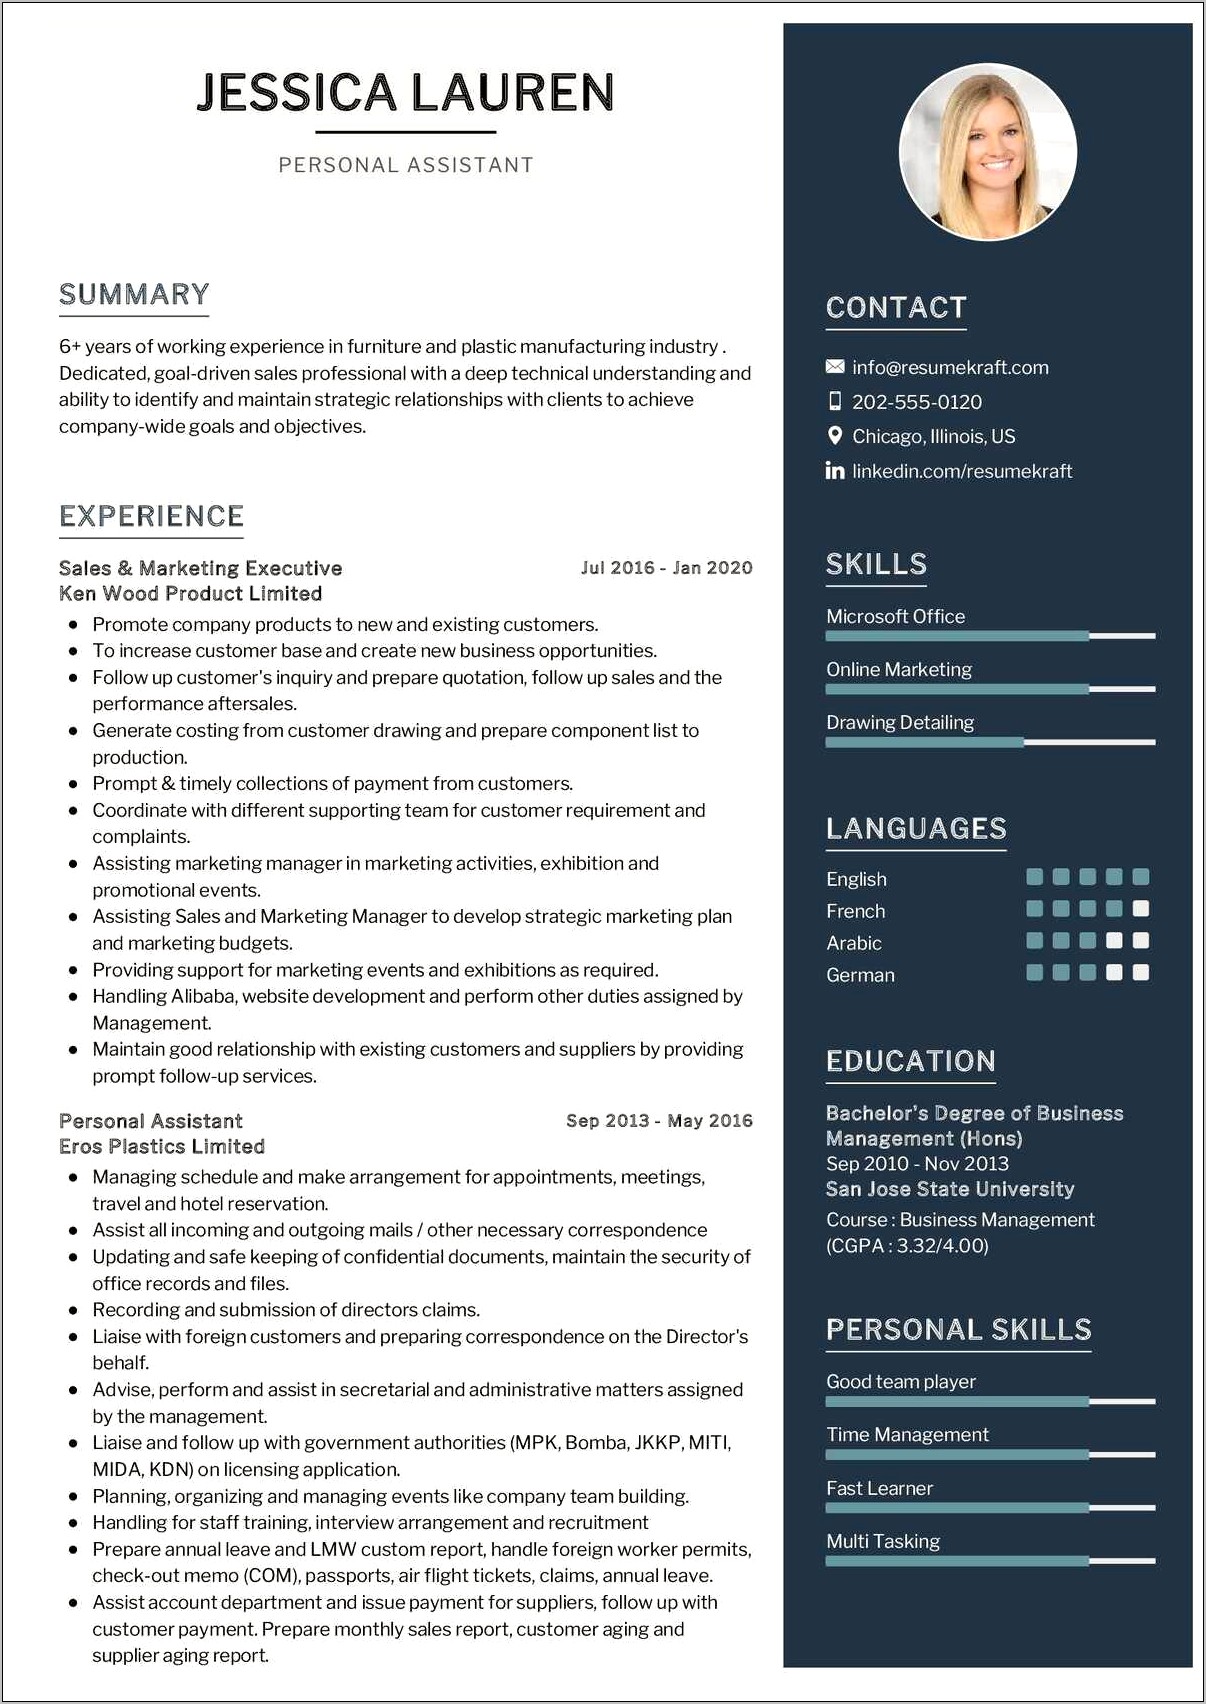 Personal Assistant Resume Job Highlights